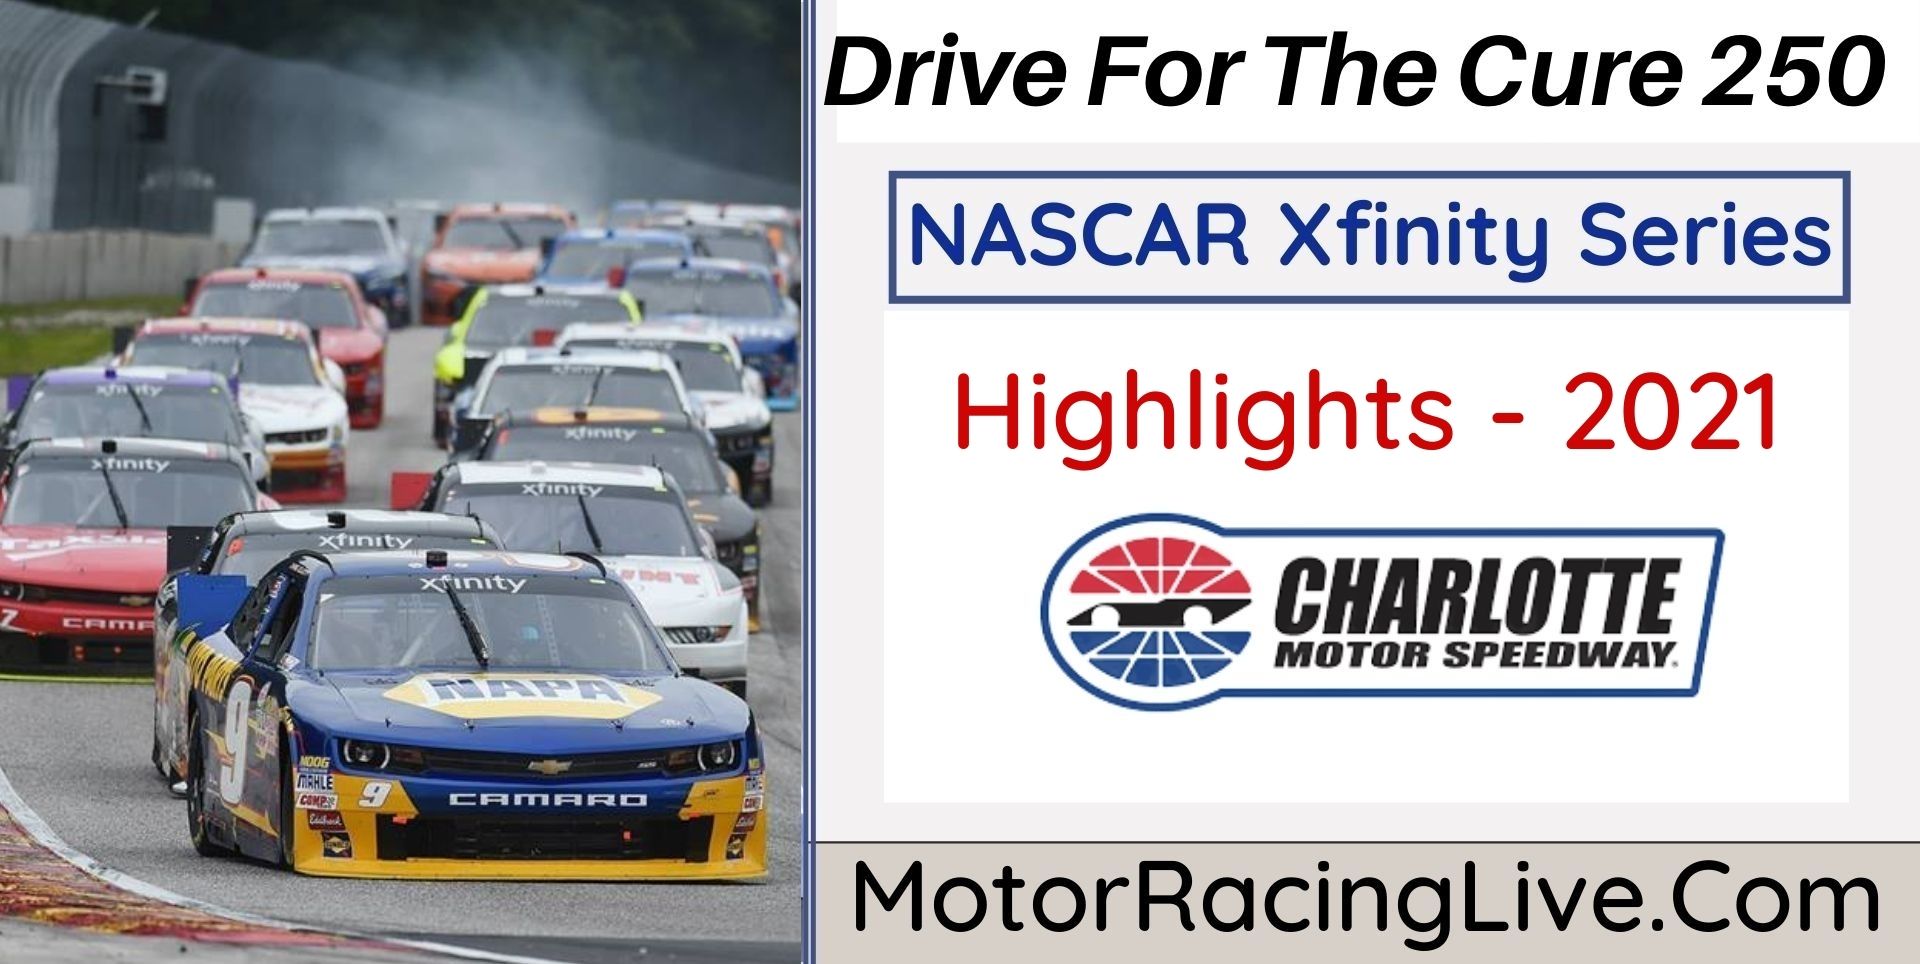 Drive For The Cure 250 Highlights 2021 NASCAR Xfinity